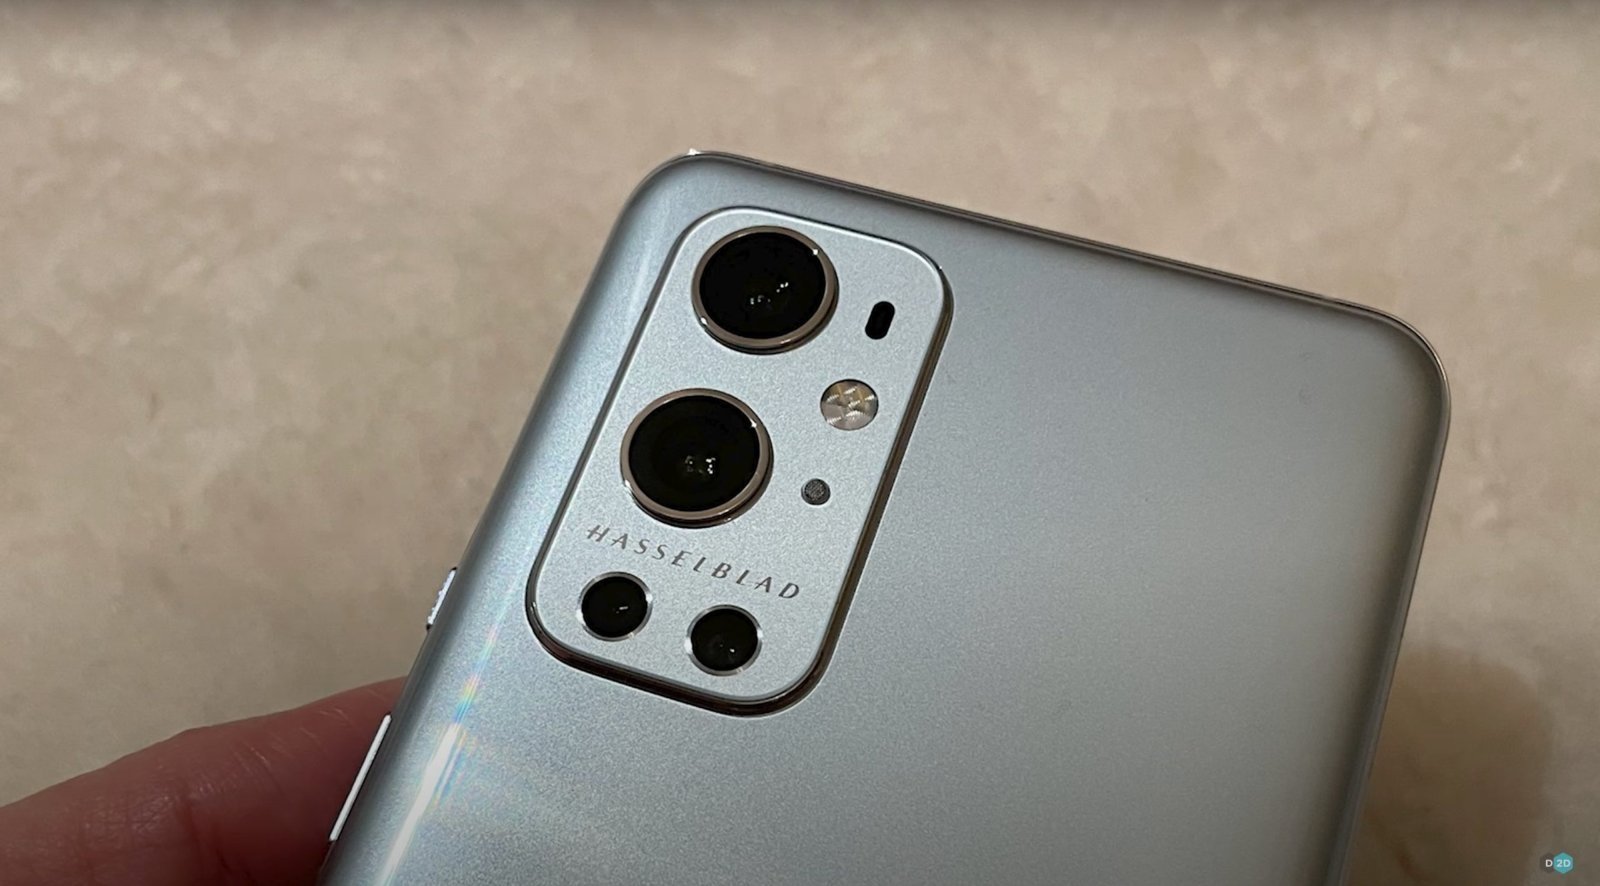 The new OnePlus 9, with its Hasselblad camera